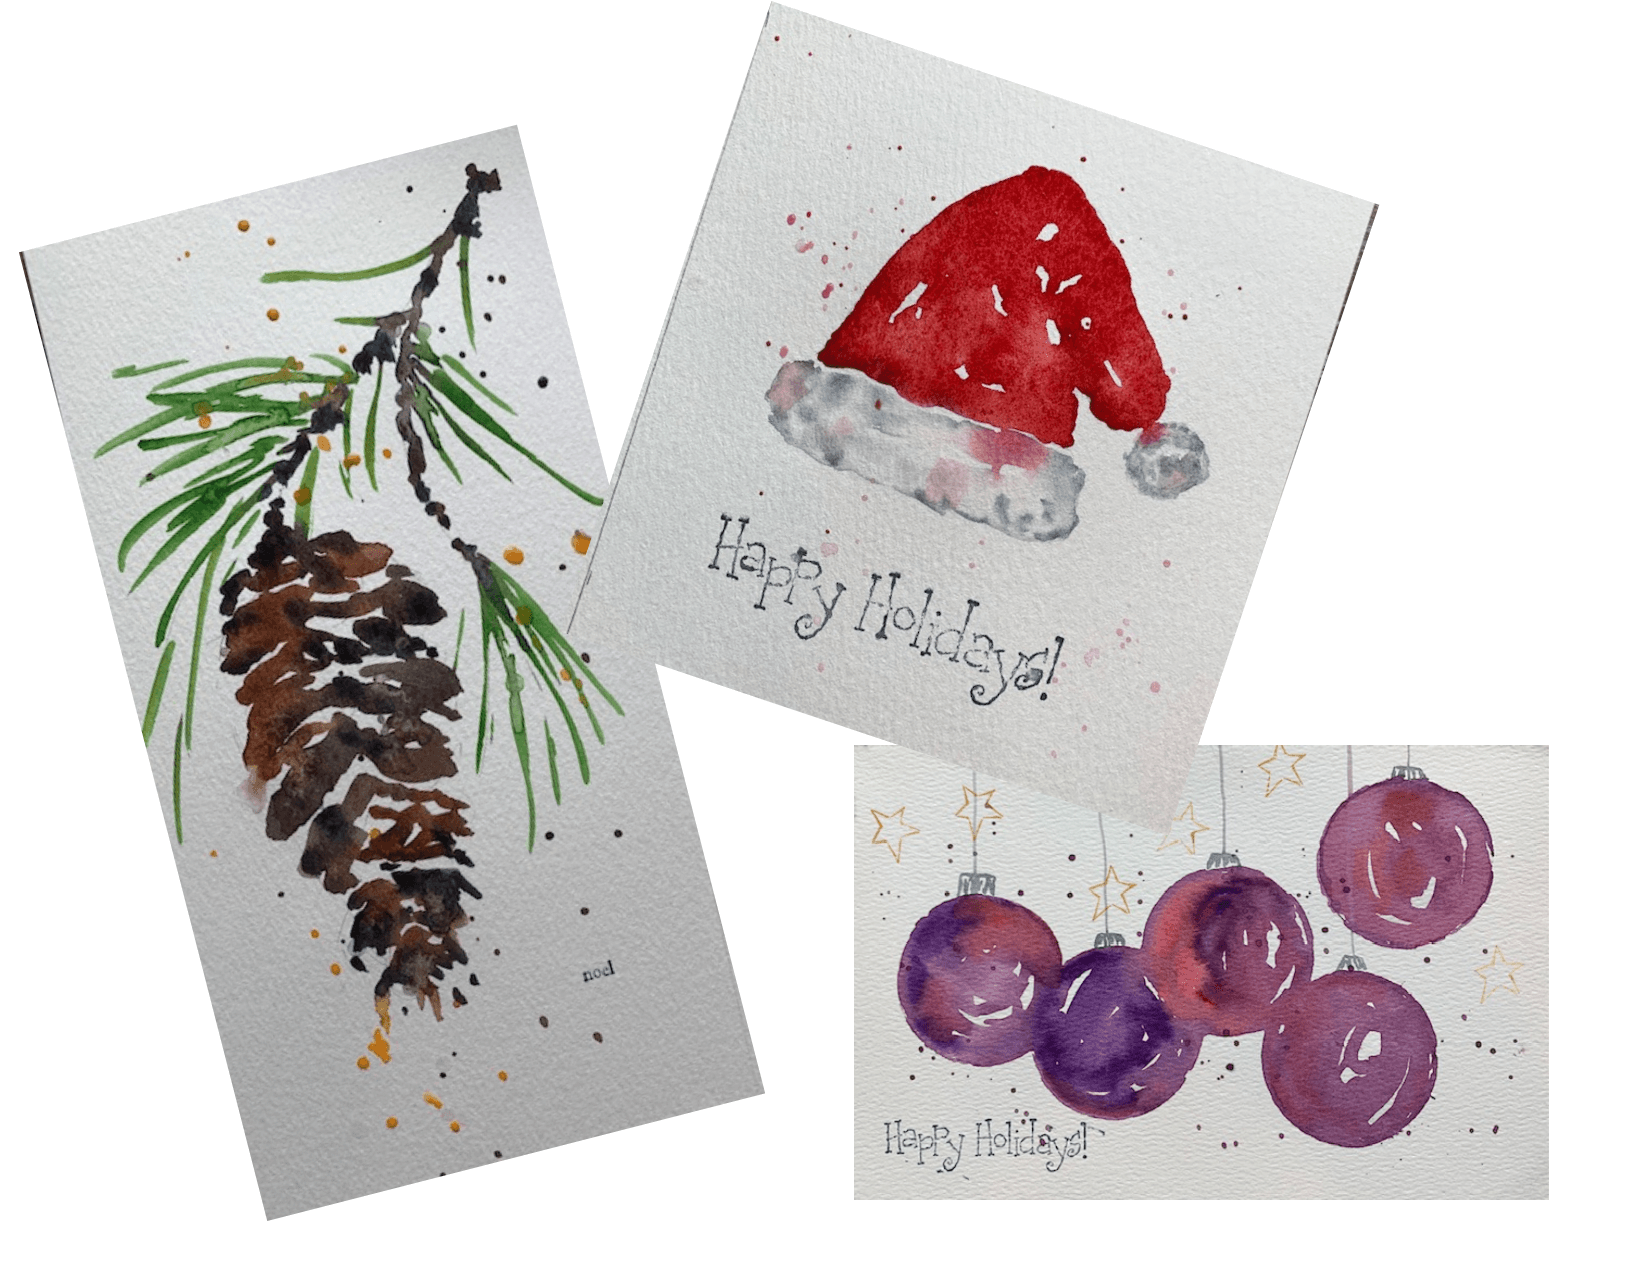 Three holiday cards are displayed. One has three hanging round holiday bulbs. One is of a Santa hat. And, one of a pine cone with needles and small stem